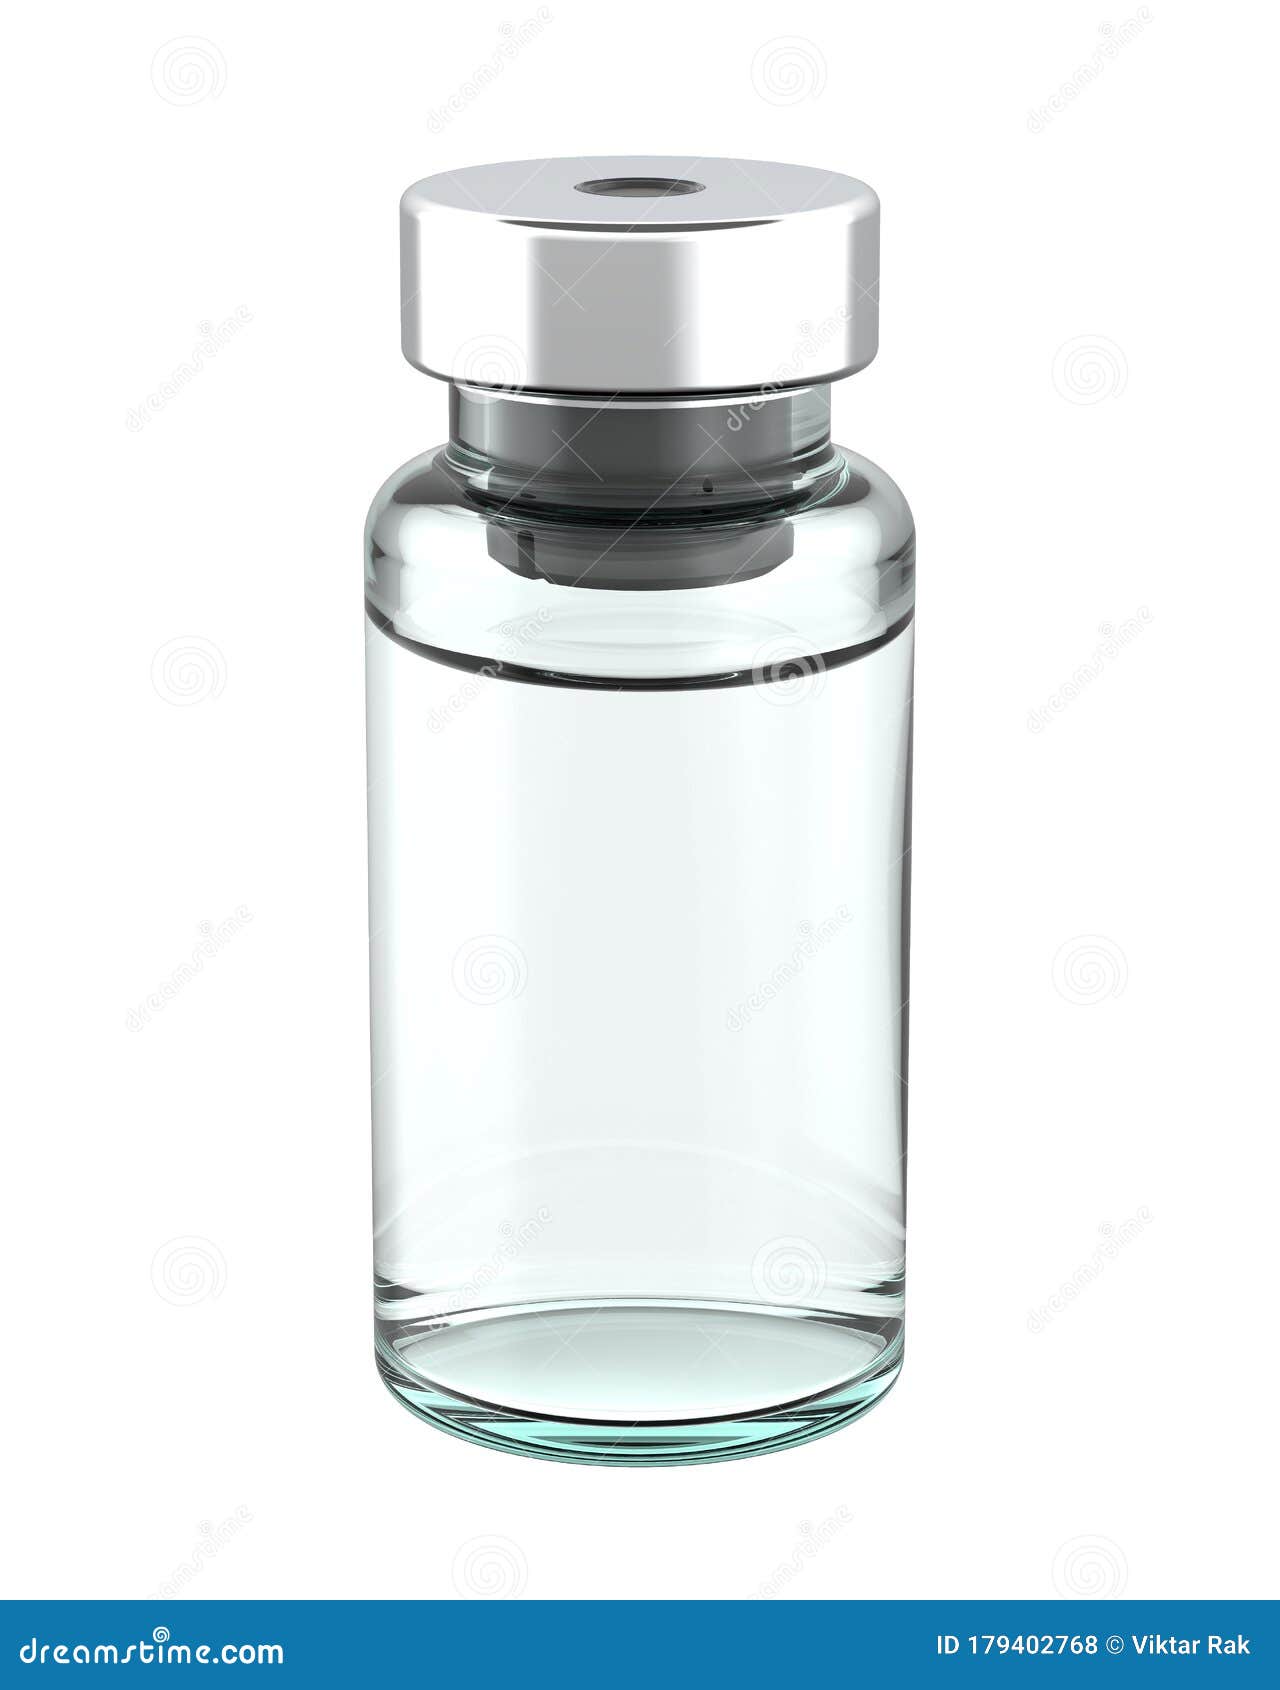 Download Clear Glass Medicine Vial With Solution For Injection Isolated On White Background. Stock ...